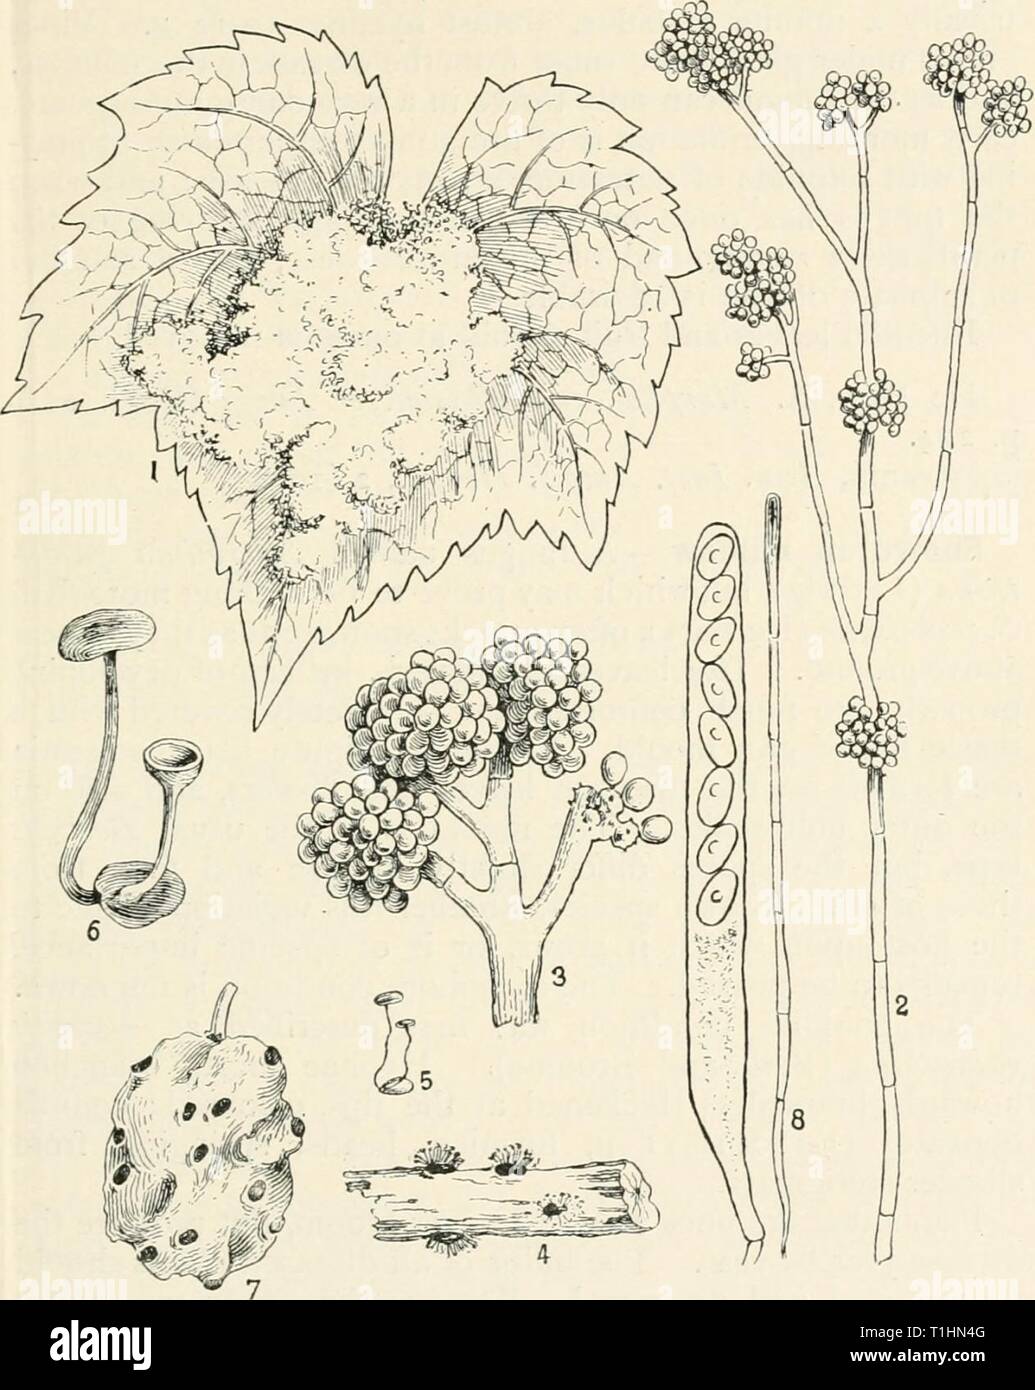 Diseases of cultivated plants and Diseases of cultivated plants and trees  diseasesofcultiv00massuoft Year: [1910?]  SCLEROTINIA 261 vine directly. Istvanffi has written a very detailed account, profusely illustrated, of the vine sclerotinia.    Fig. -j.—Sclerotinia fuckeliana. i, vine leaf with Botrytis form of fungus ; 2, conidiophores of Botrytis ; 3, a head or cluster of conidia ; 4, sclerotia bearing Botrytis form of fruit ; 5, asclerotium bearing two ascophores ; 6, like fig. 5, on a larger scale ; 7, a shrivelled grape with sclerotia ; 8, ascus with spores. All e-xcept Fig. i mag. Ascop Stock Photo